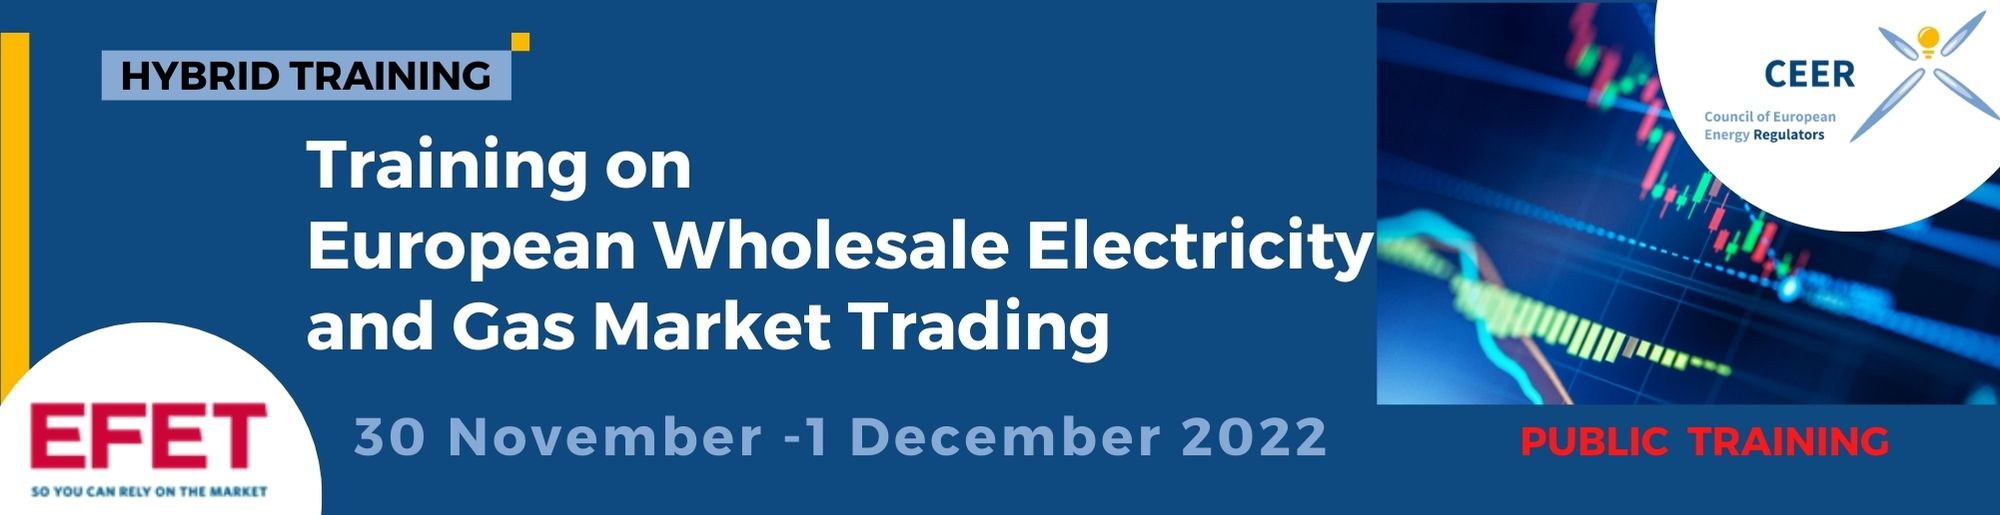 CEER-EFET Hybrid Training on  European Wholesale Electricity and Gas Market Trading